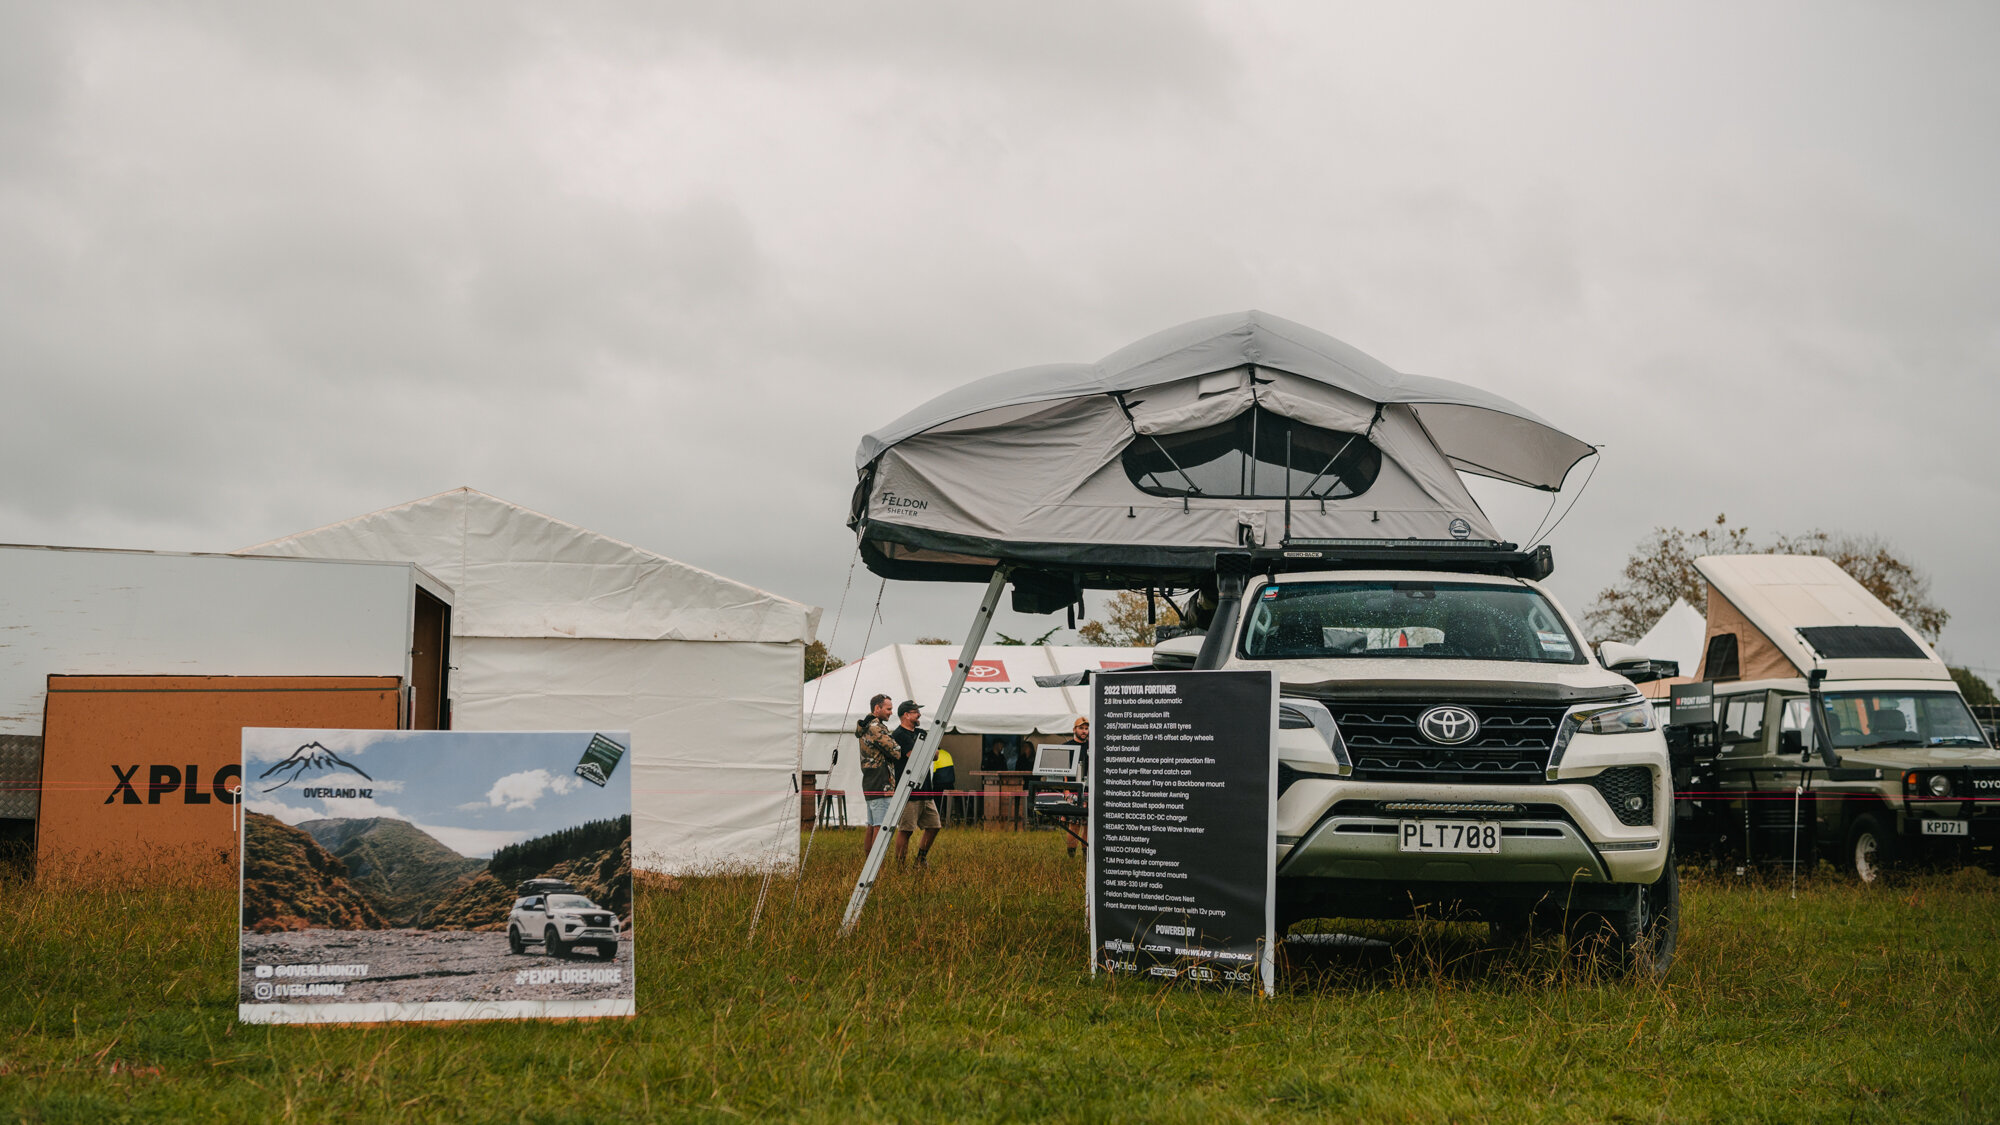 Cheers to everyone that braved the weather to swing by and say hi over the weekend! The 4x4 Outdoor Expo was epic - so cool to see all the awesome stuff on offer and meet the faces behind the names. #OverlandNZ

---

#overlanding #overland #southisla